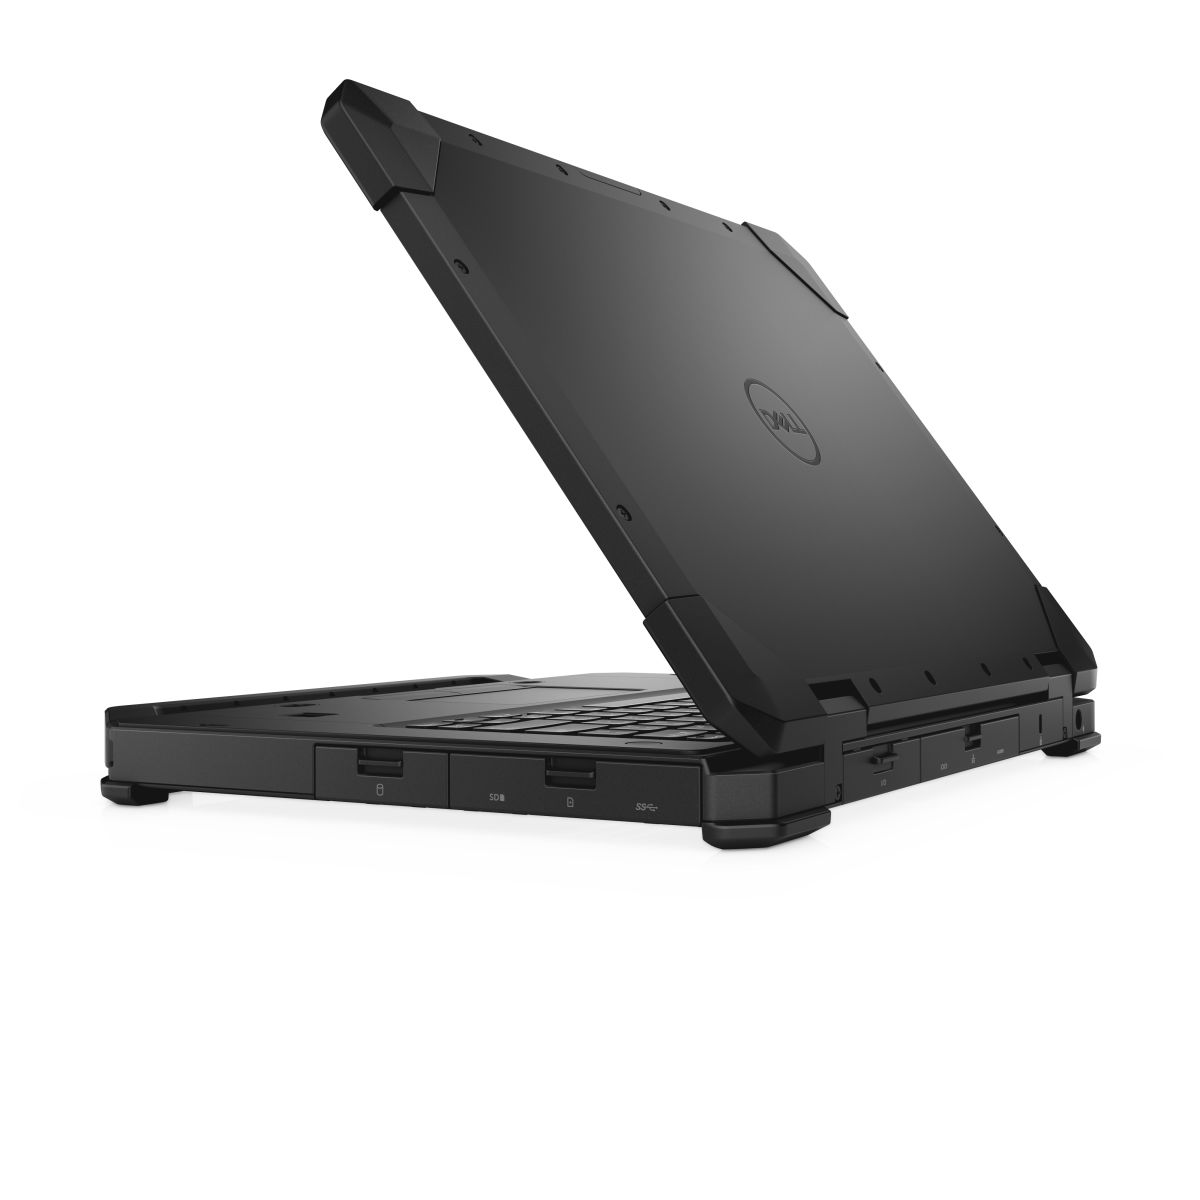 DELL Latitude Rugged 5420 - 6YNGK laptop specifications